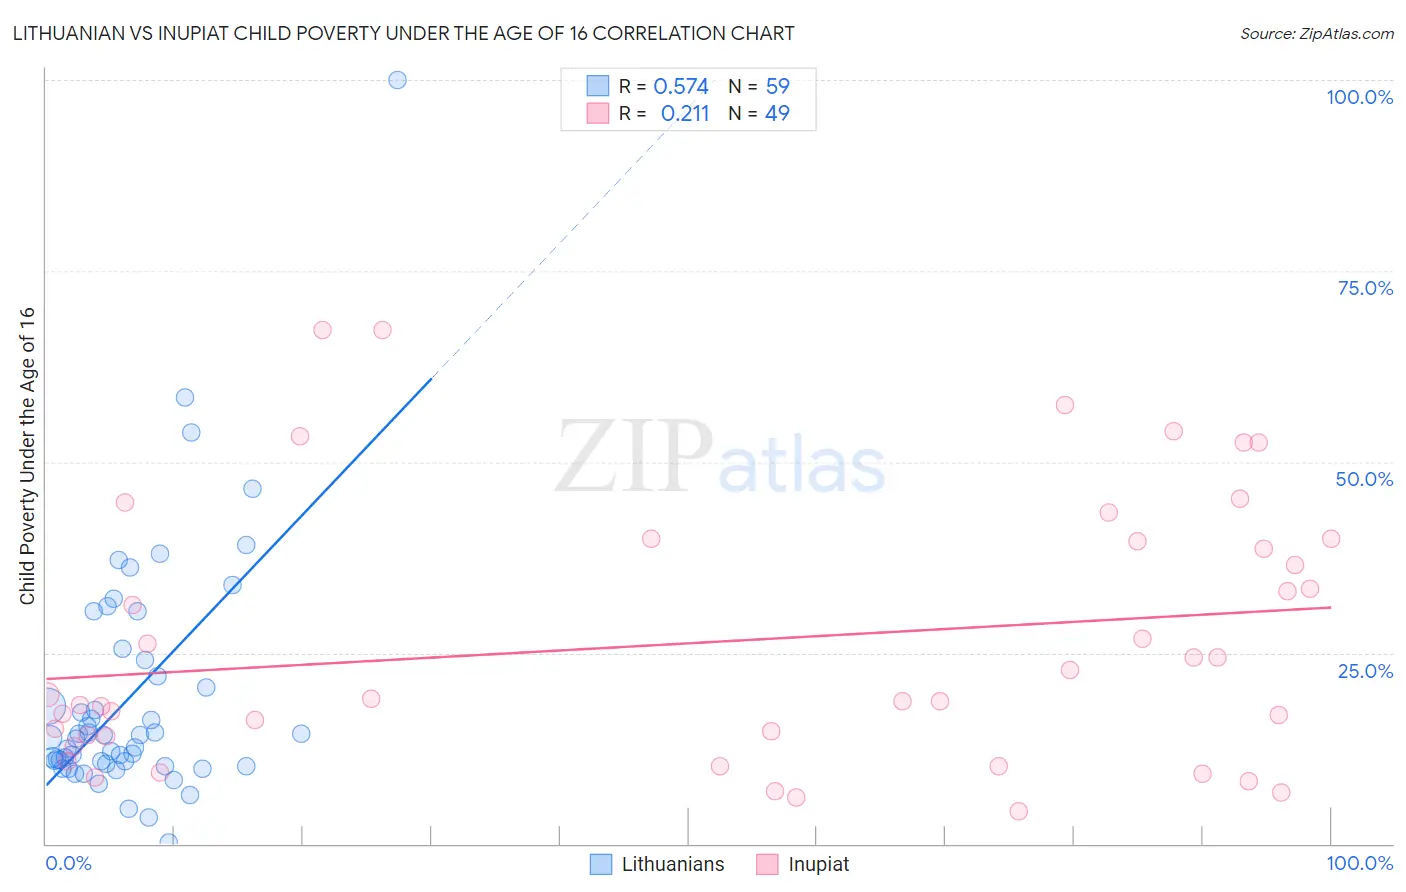 Lithuanian vs Inupiat Child Poverty Under the Age of 16